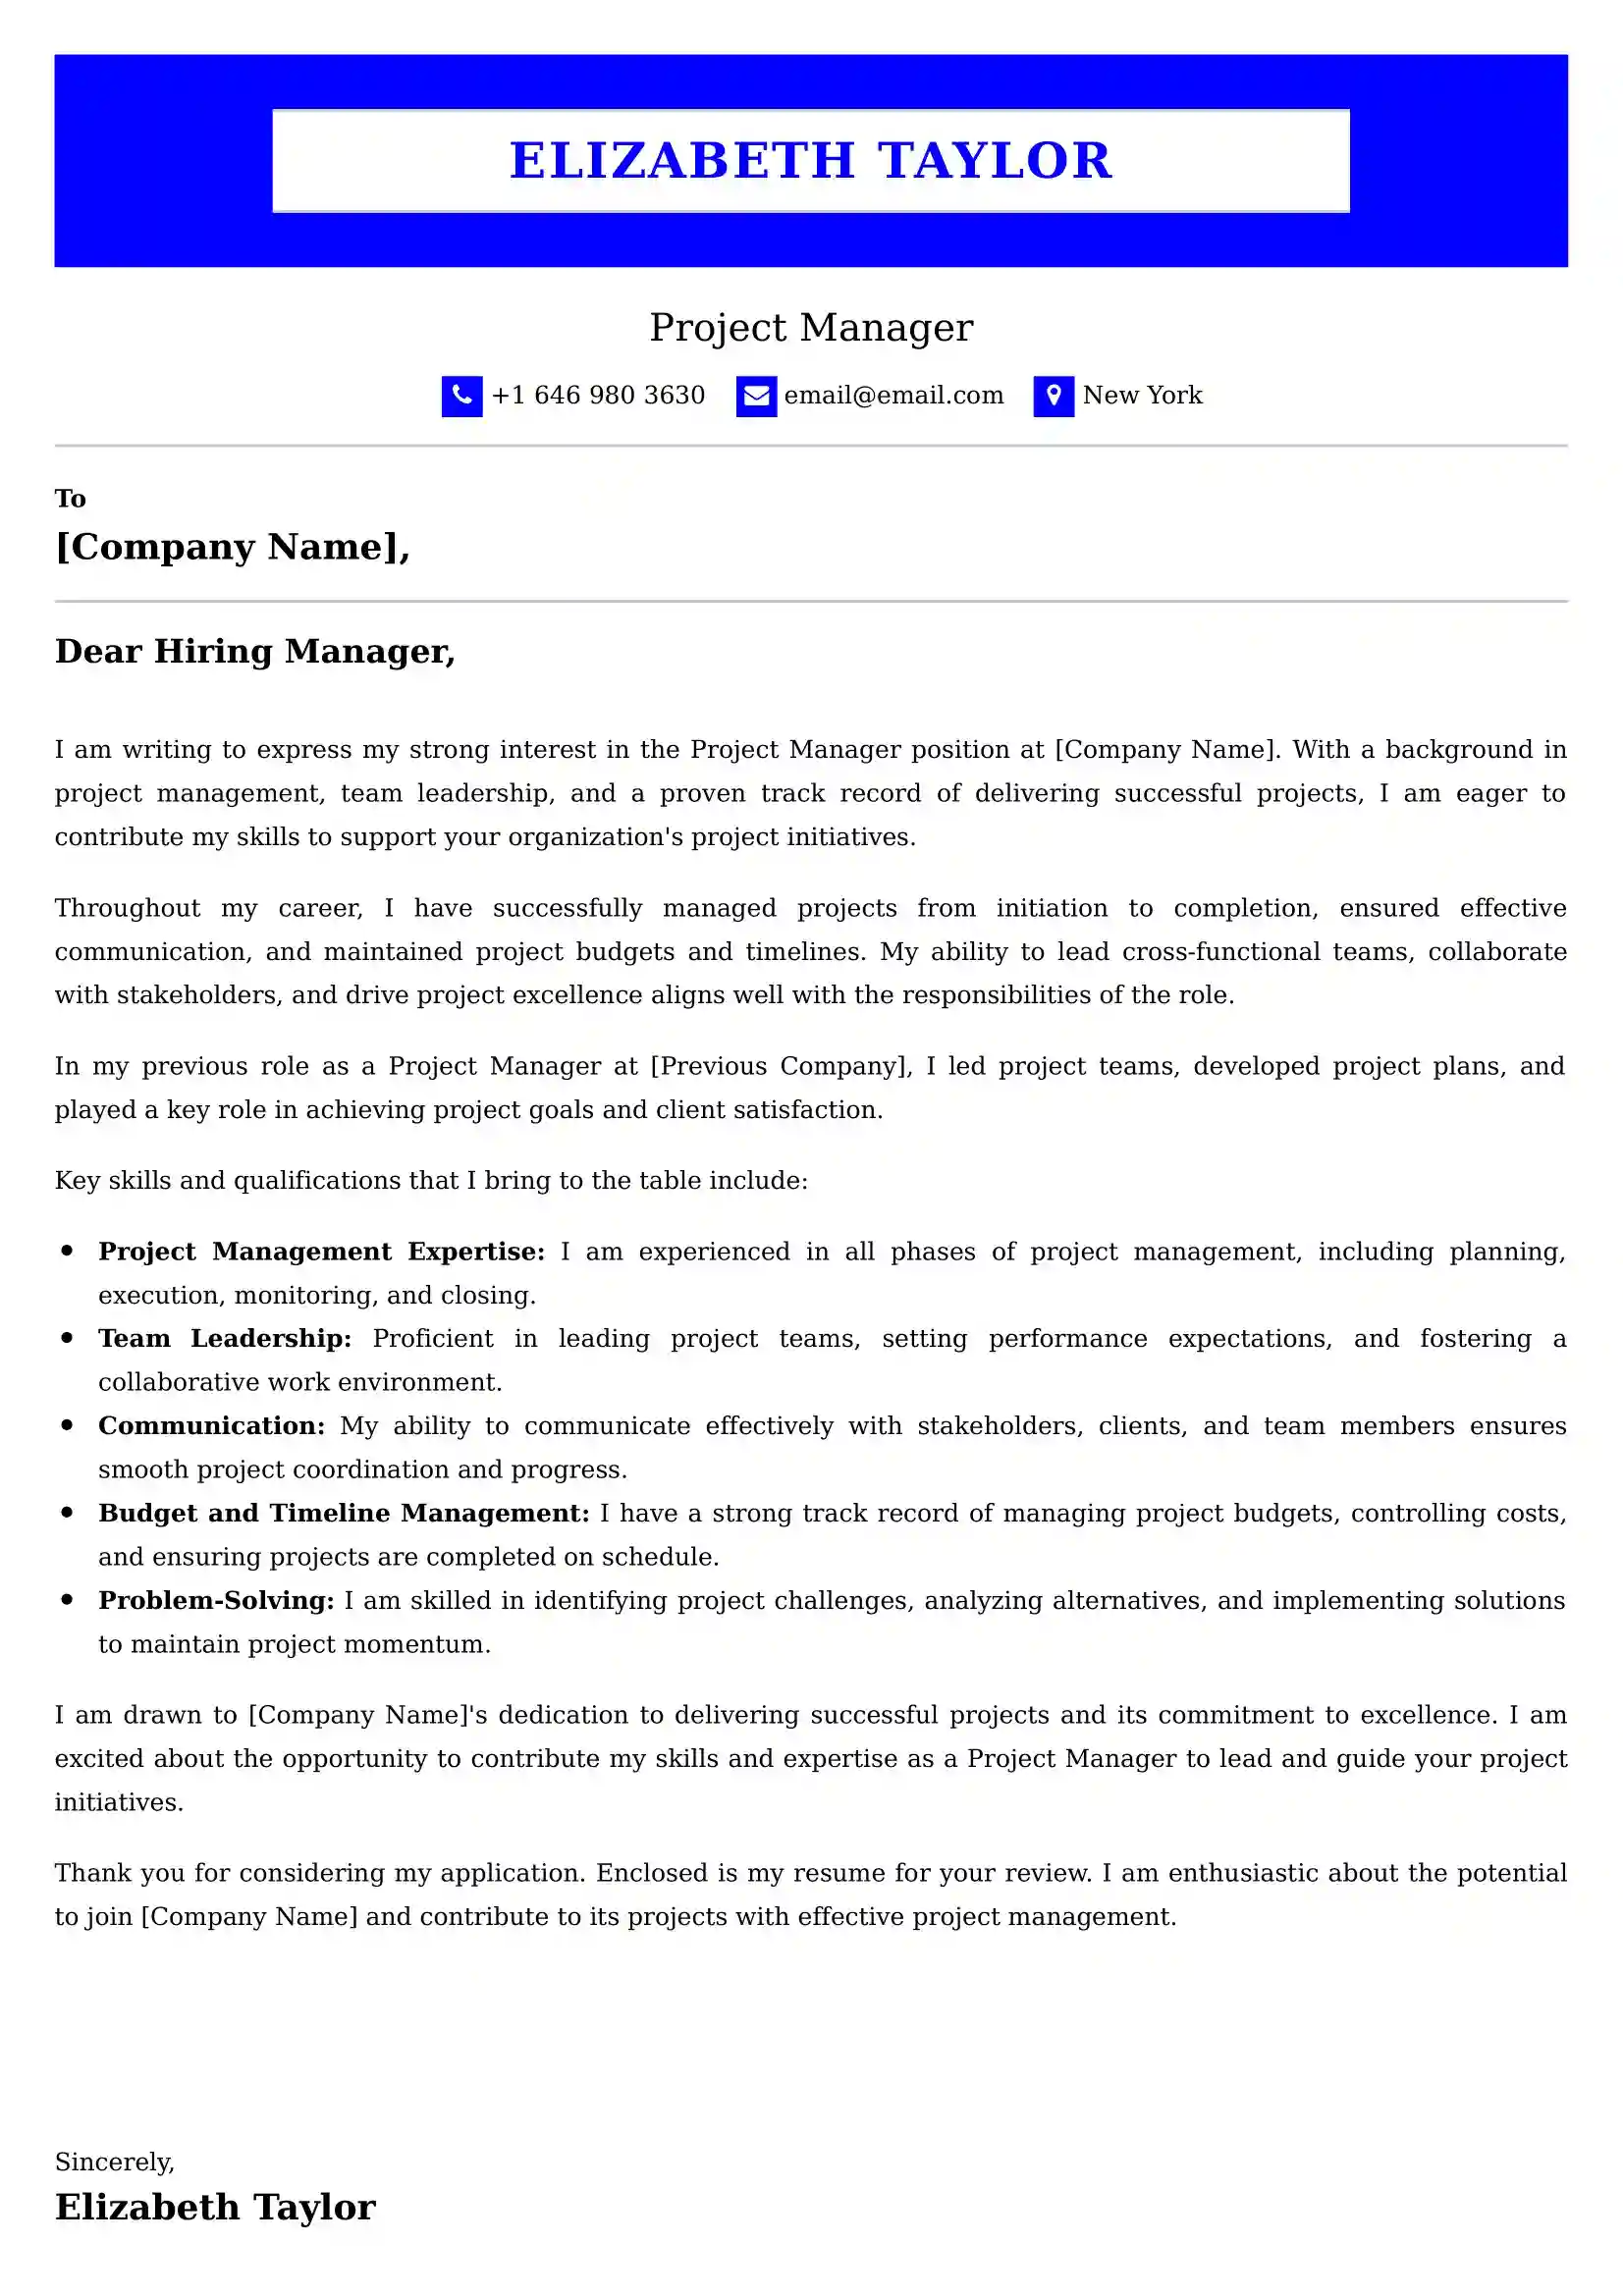 Project Manager Cover Letter Examples -Latest Brazilian Templates